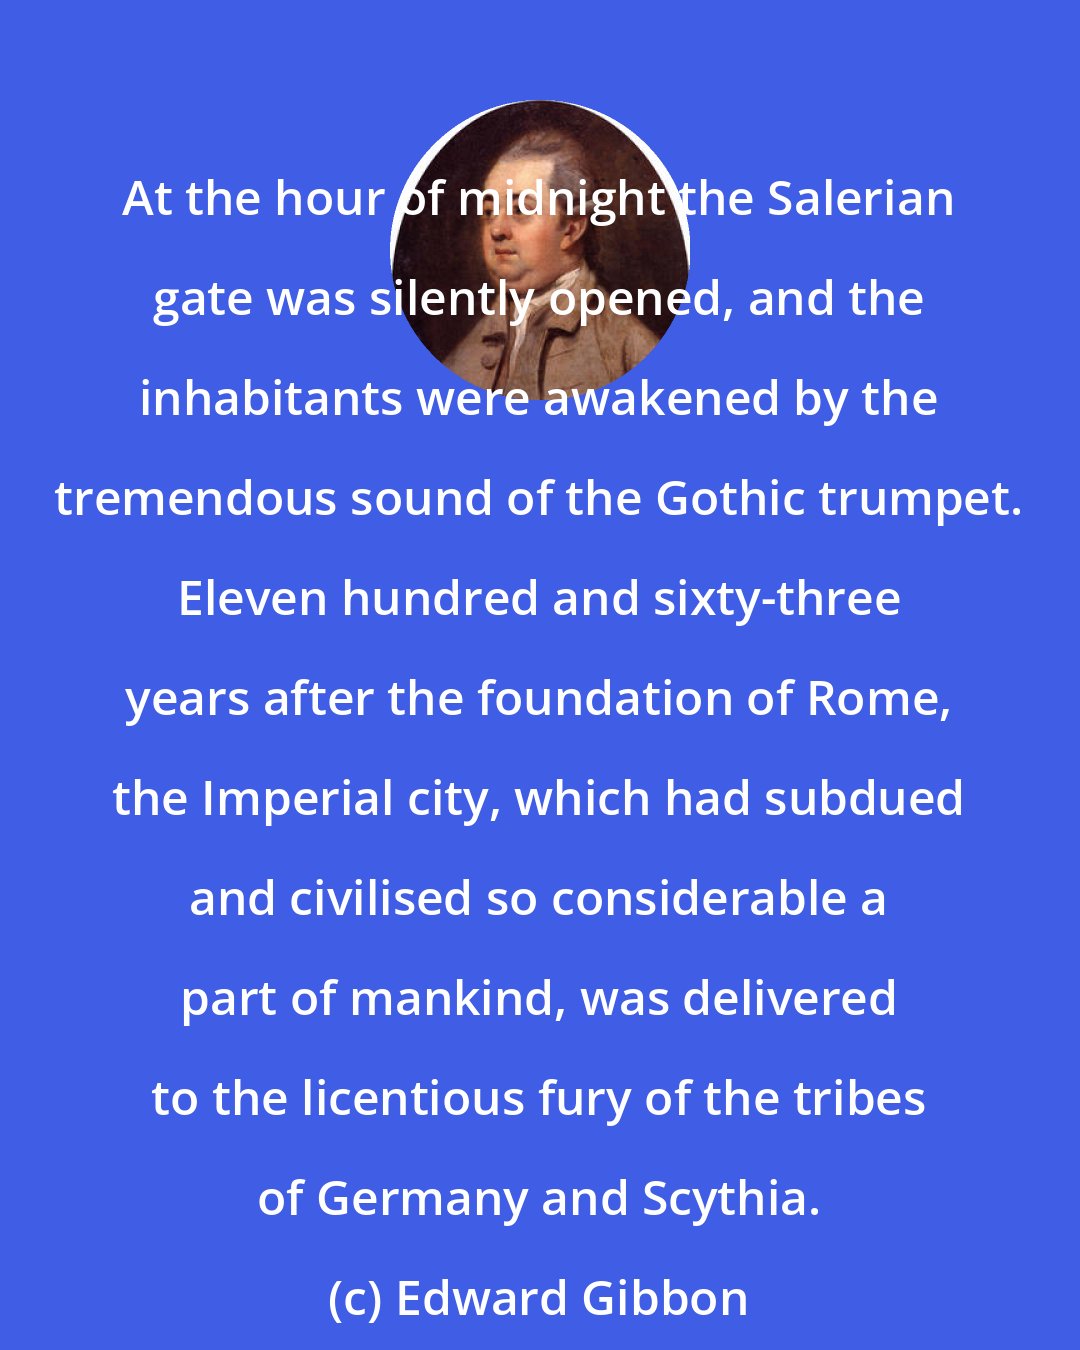 Edward Gibbon: At the hour of midnight the Salerian gate was silently opened, and the inhabitants were awakened by the tremendous sound of the Gothic trumpet. Eleven hundred and sixty-three years after the foundation of Rome, the Imperial city, which had subdued and civilised so considerable a part of mankind, was delivered to the licentious fury of the tribes of Germany and Scythia.